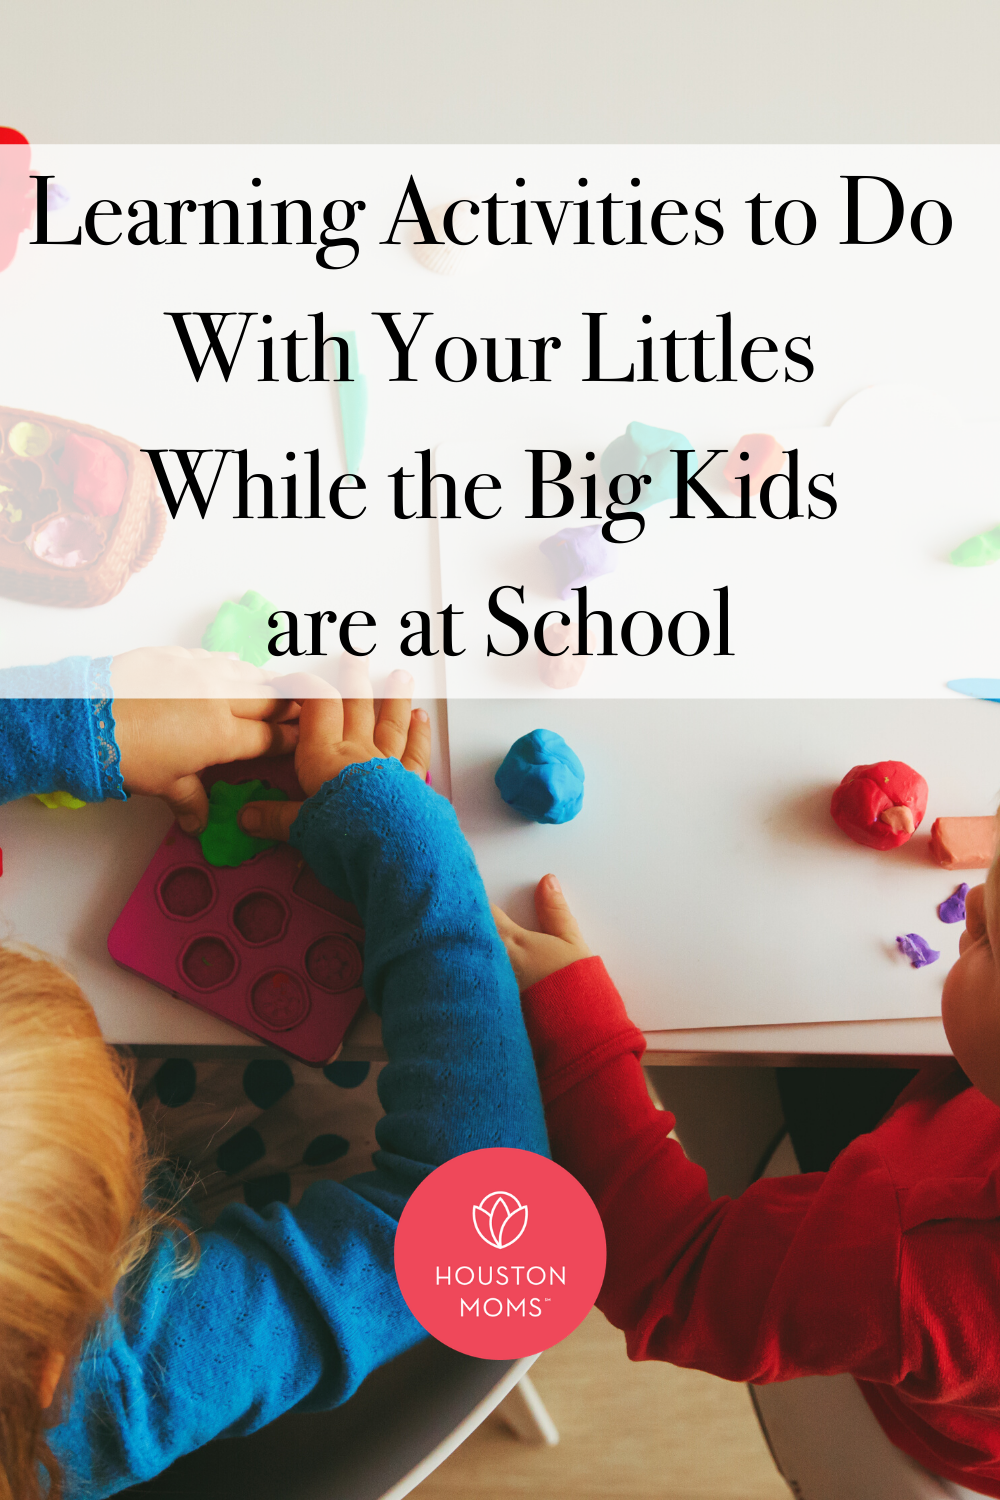 Houston Moms "Learning Activities to do With Your Littles While the Big Kids are at School" #houstonmomsblog #houstonmoms #momsasroundhouston